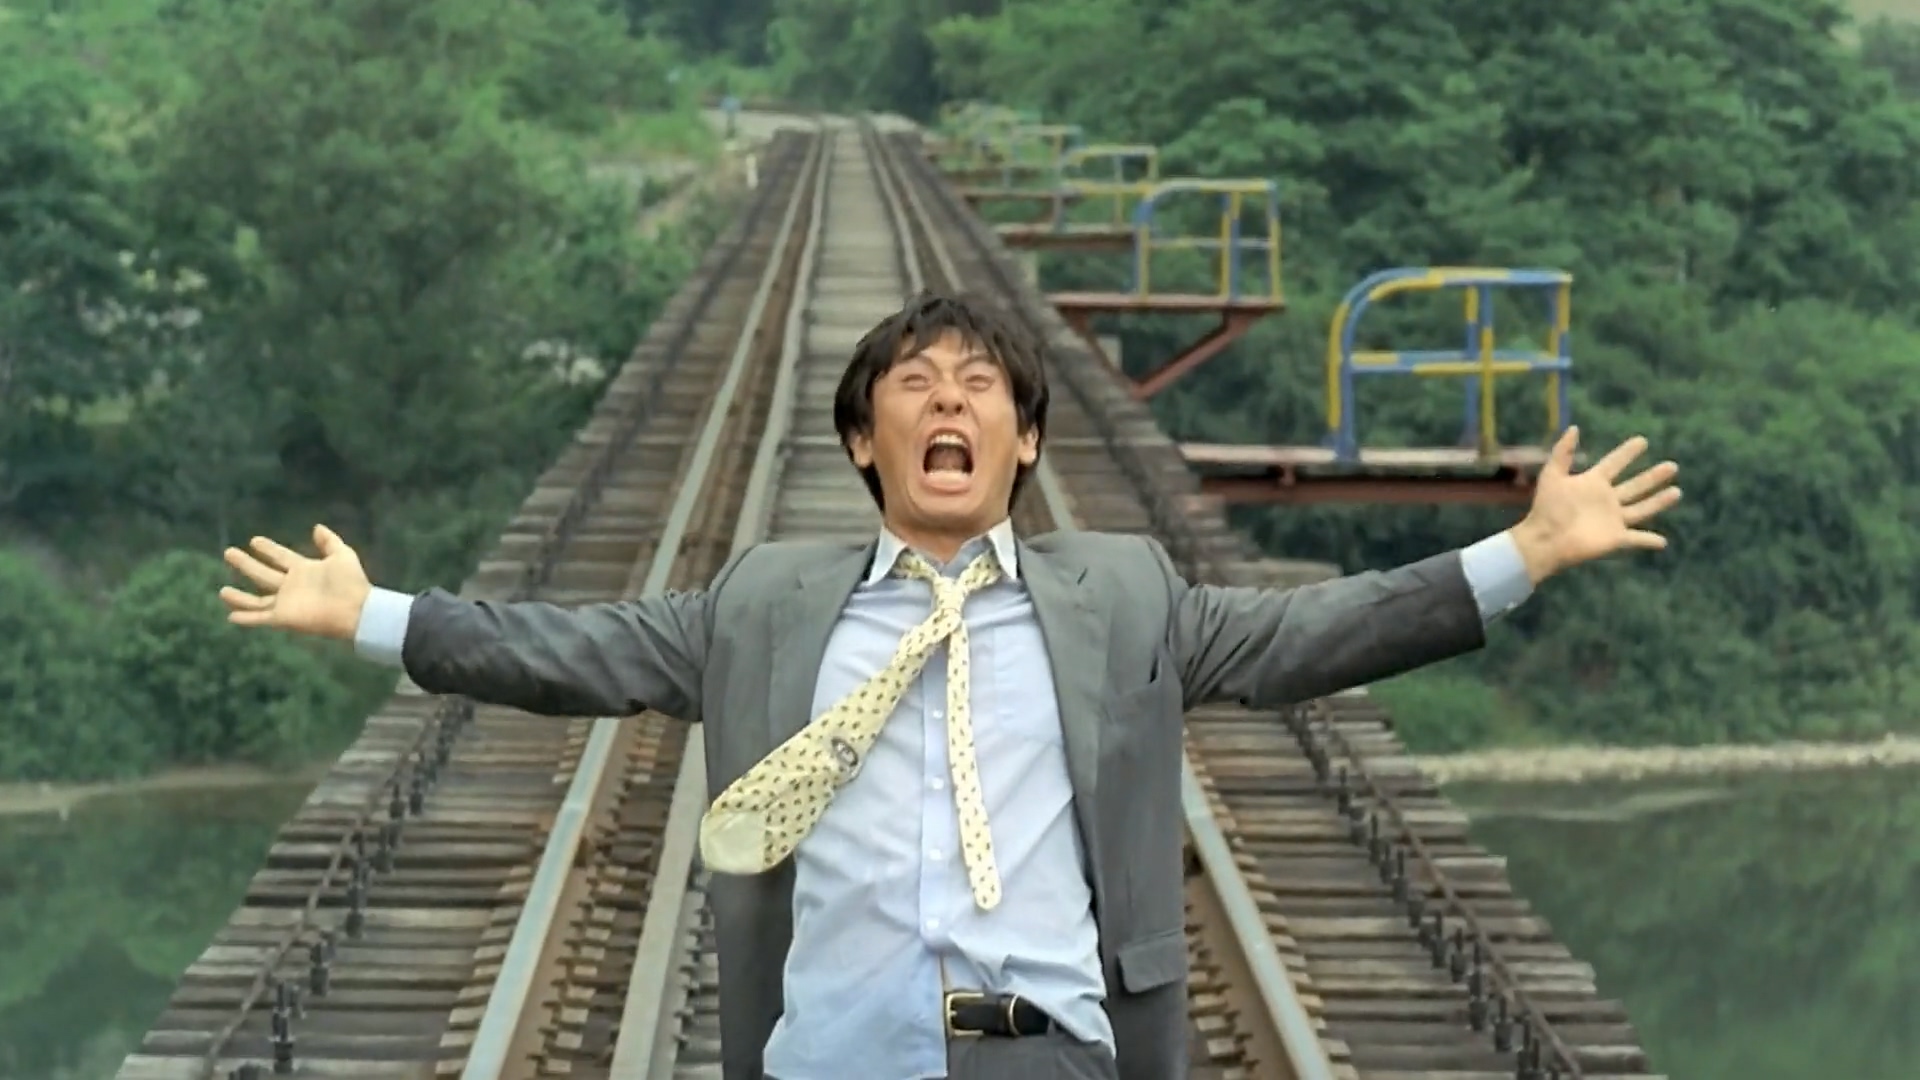 Man yelling with arms wide while standing on empty train tracks